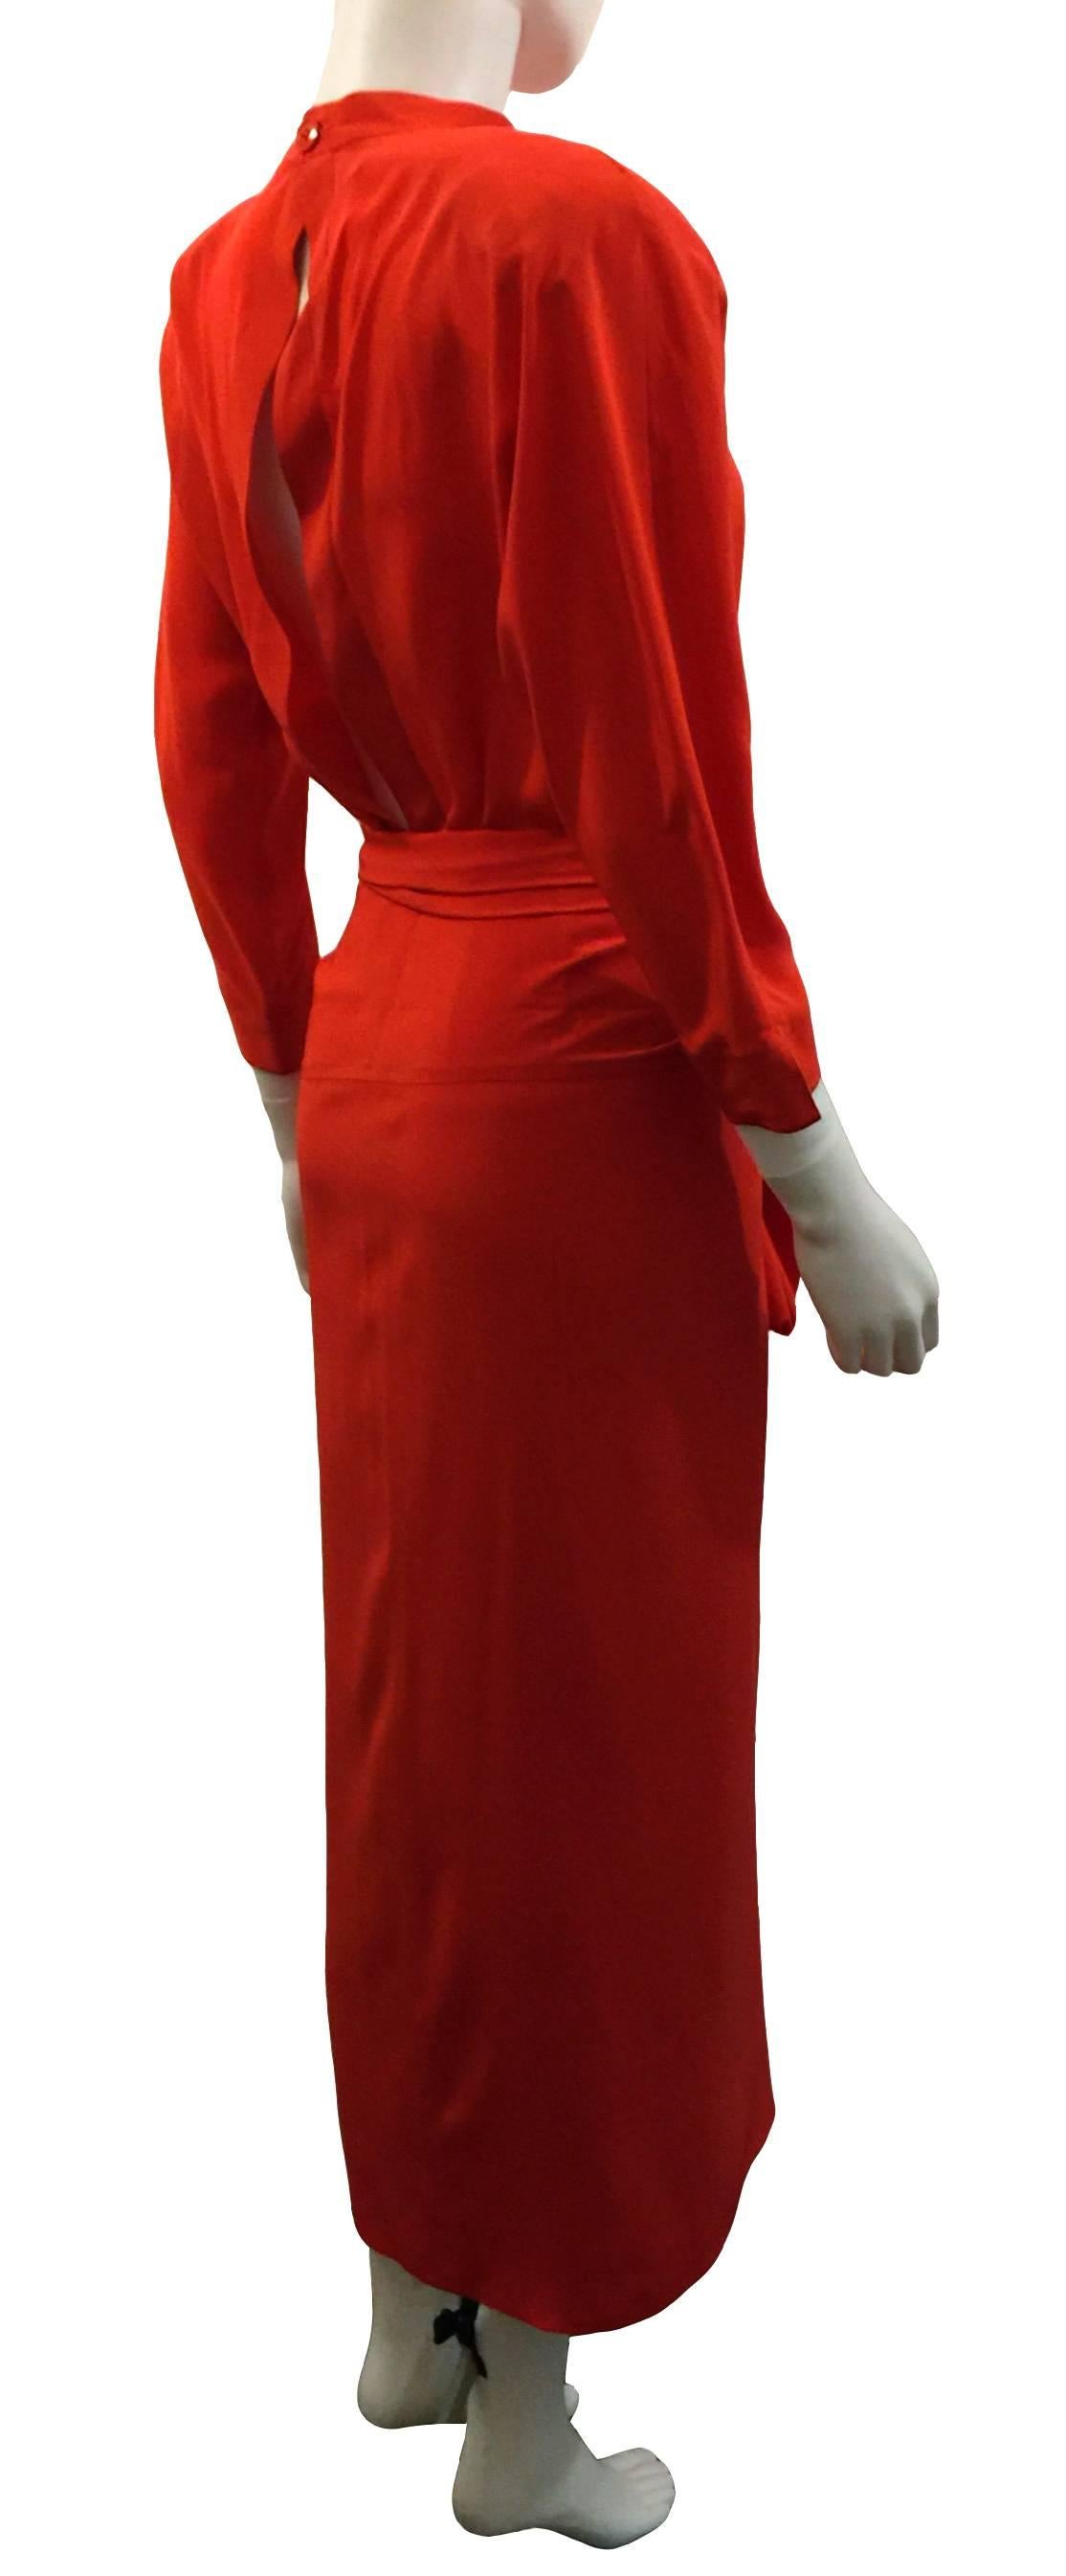 Red Gianfranco Ferré Vintage Dress with Over-Skirt.  